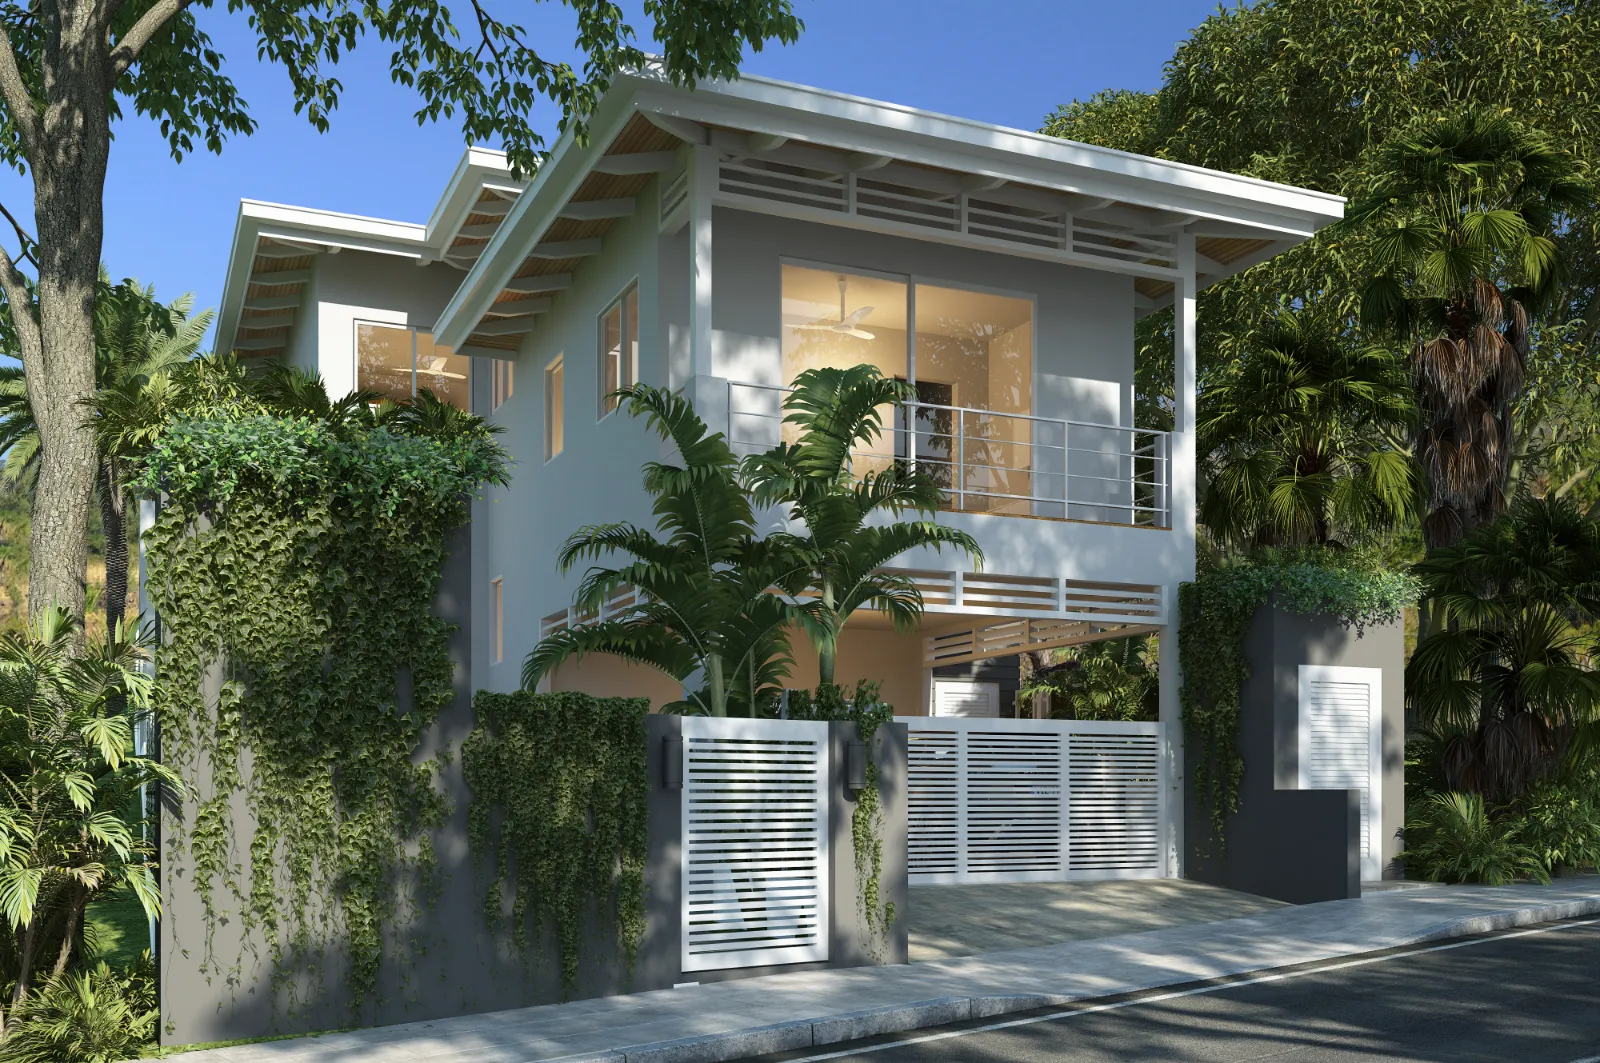 Available 4-Bedroom Homes at Tamarindo Park